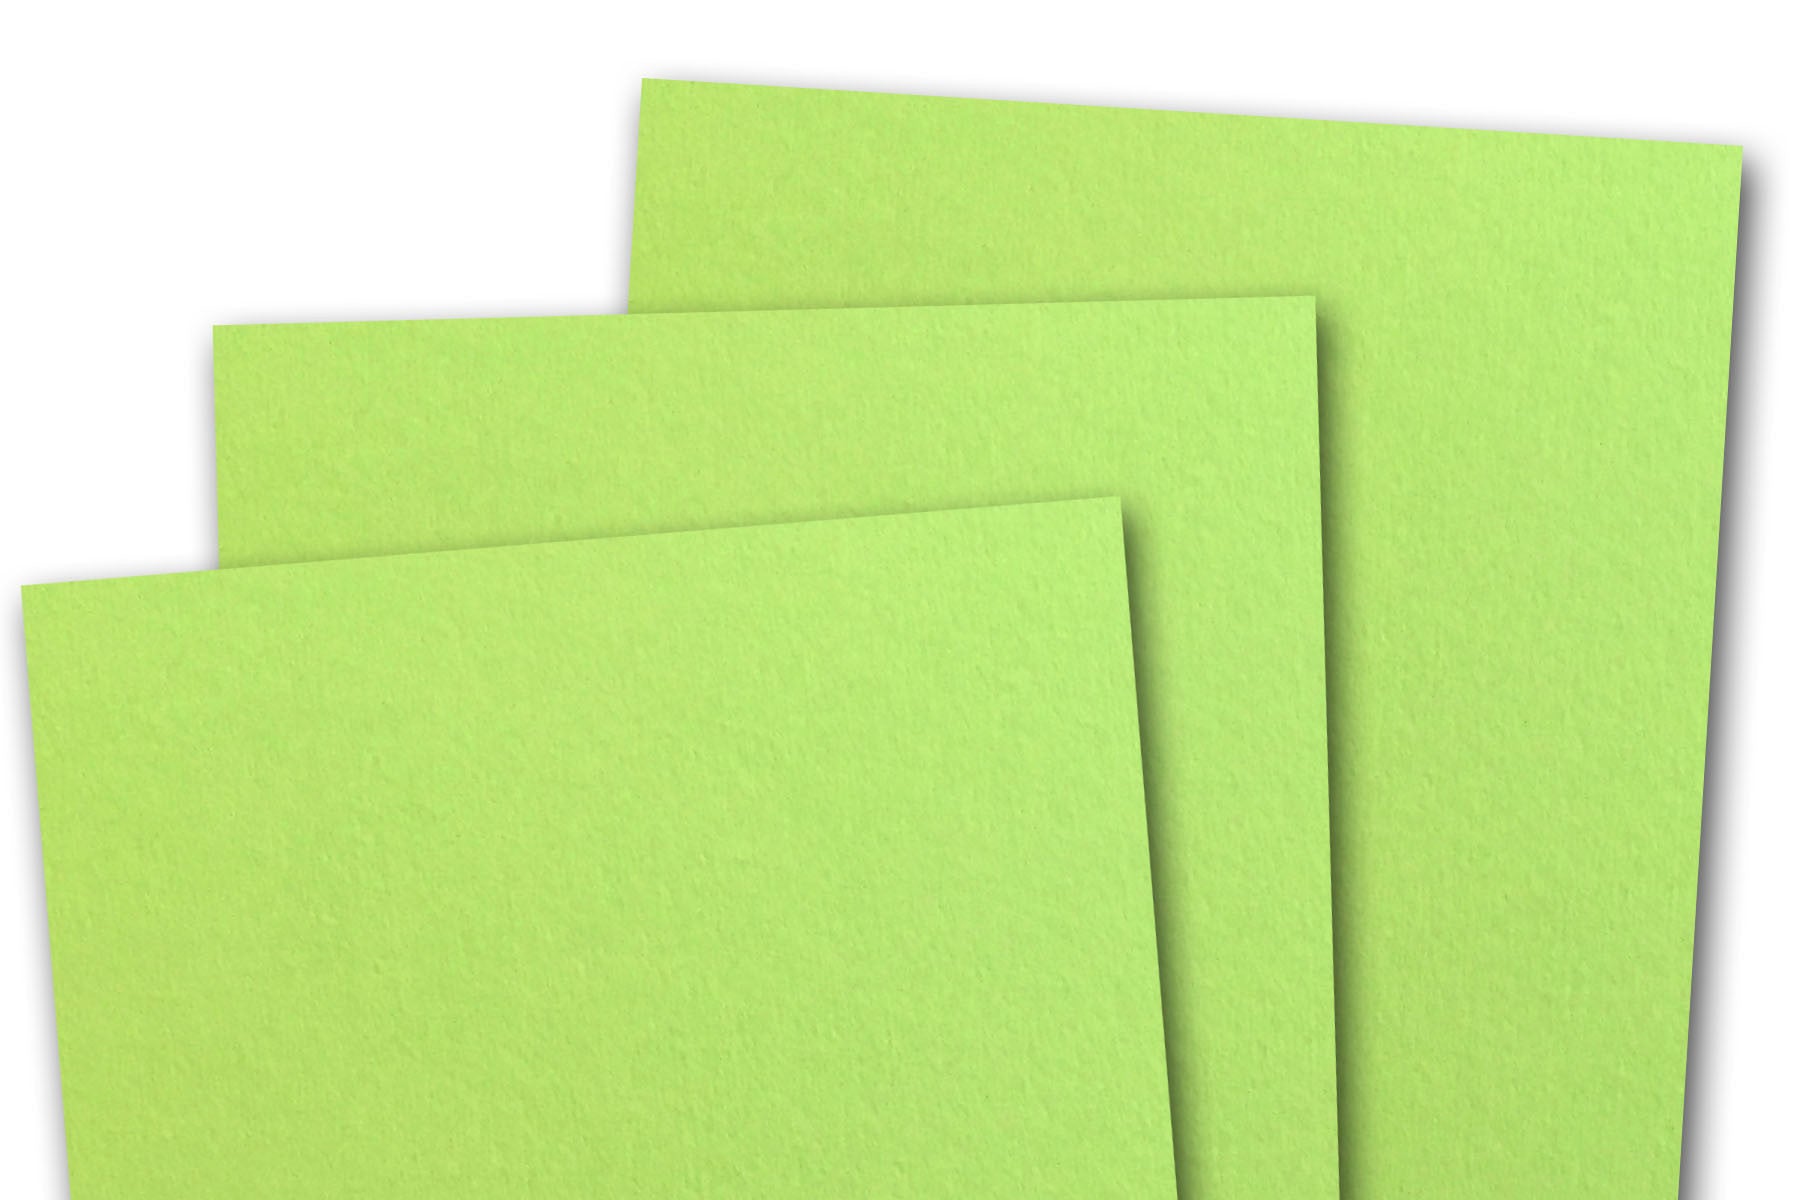 15Sheets Green Cardstock Paper, 12x12 Card stock for Cricut, Thick  Construction Paper for Card Making, Scrapbooking, Craft 90 lb / 250 gsm  (Green)